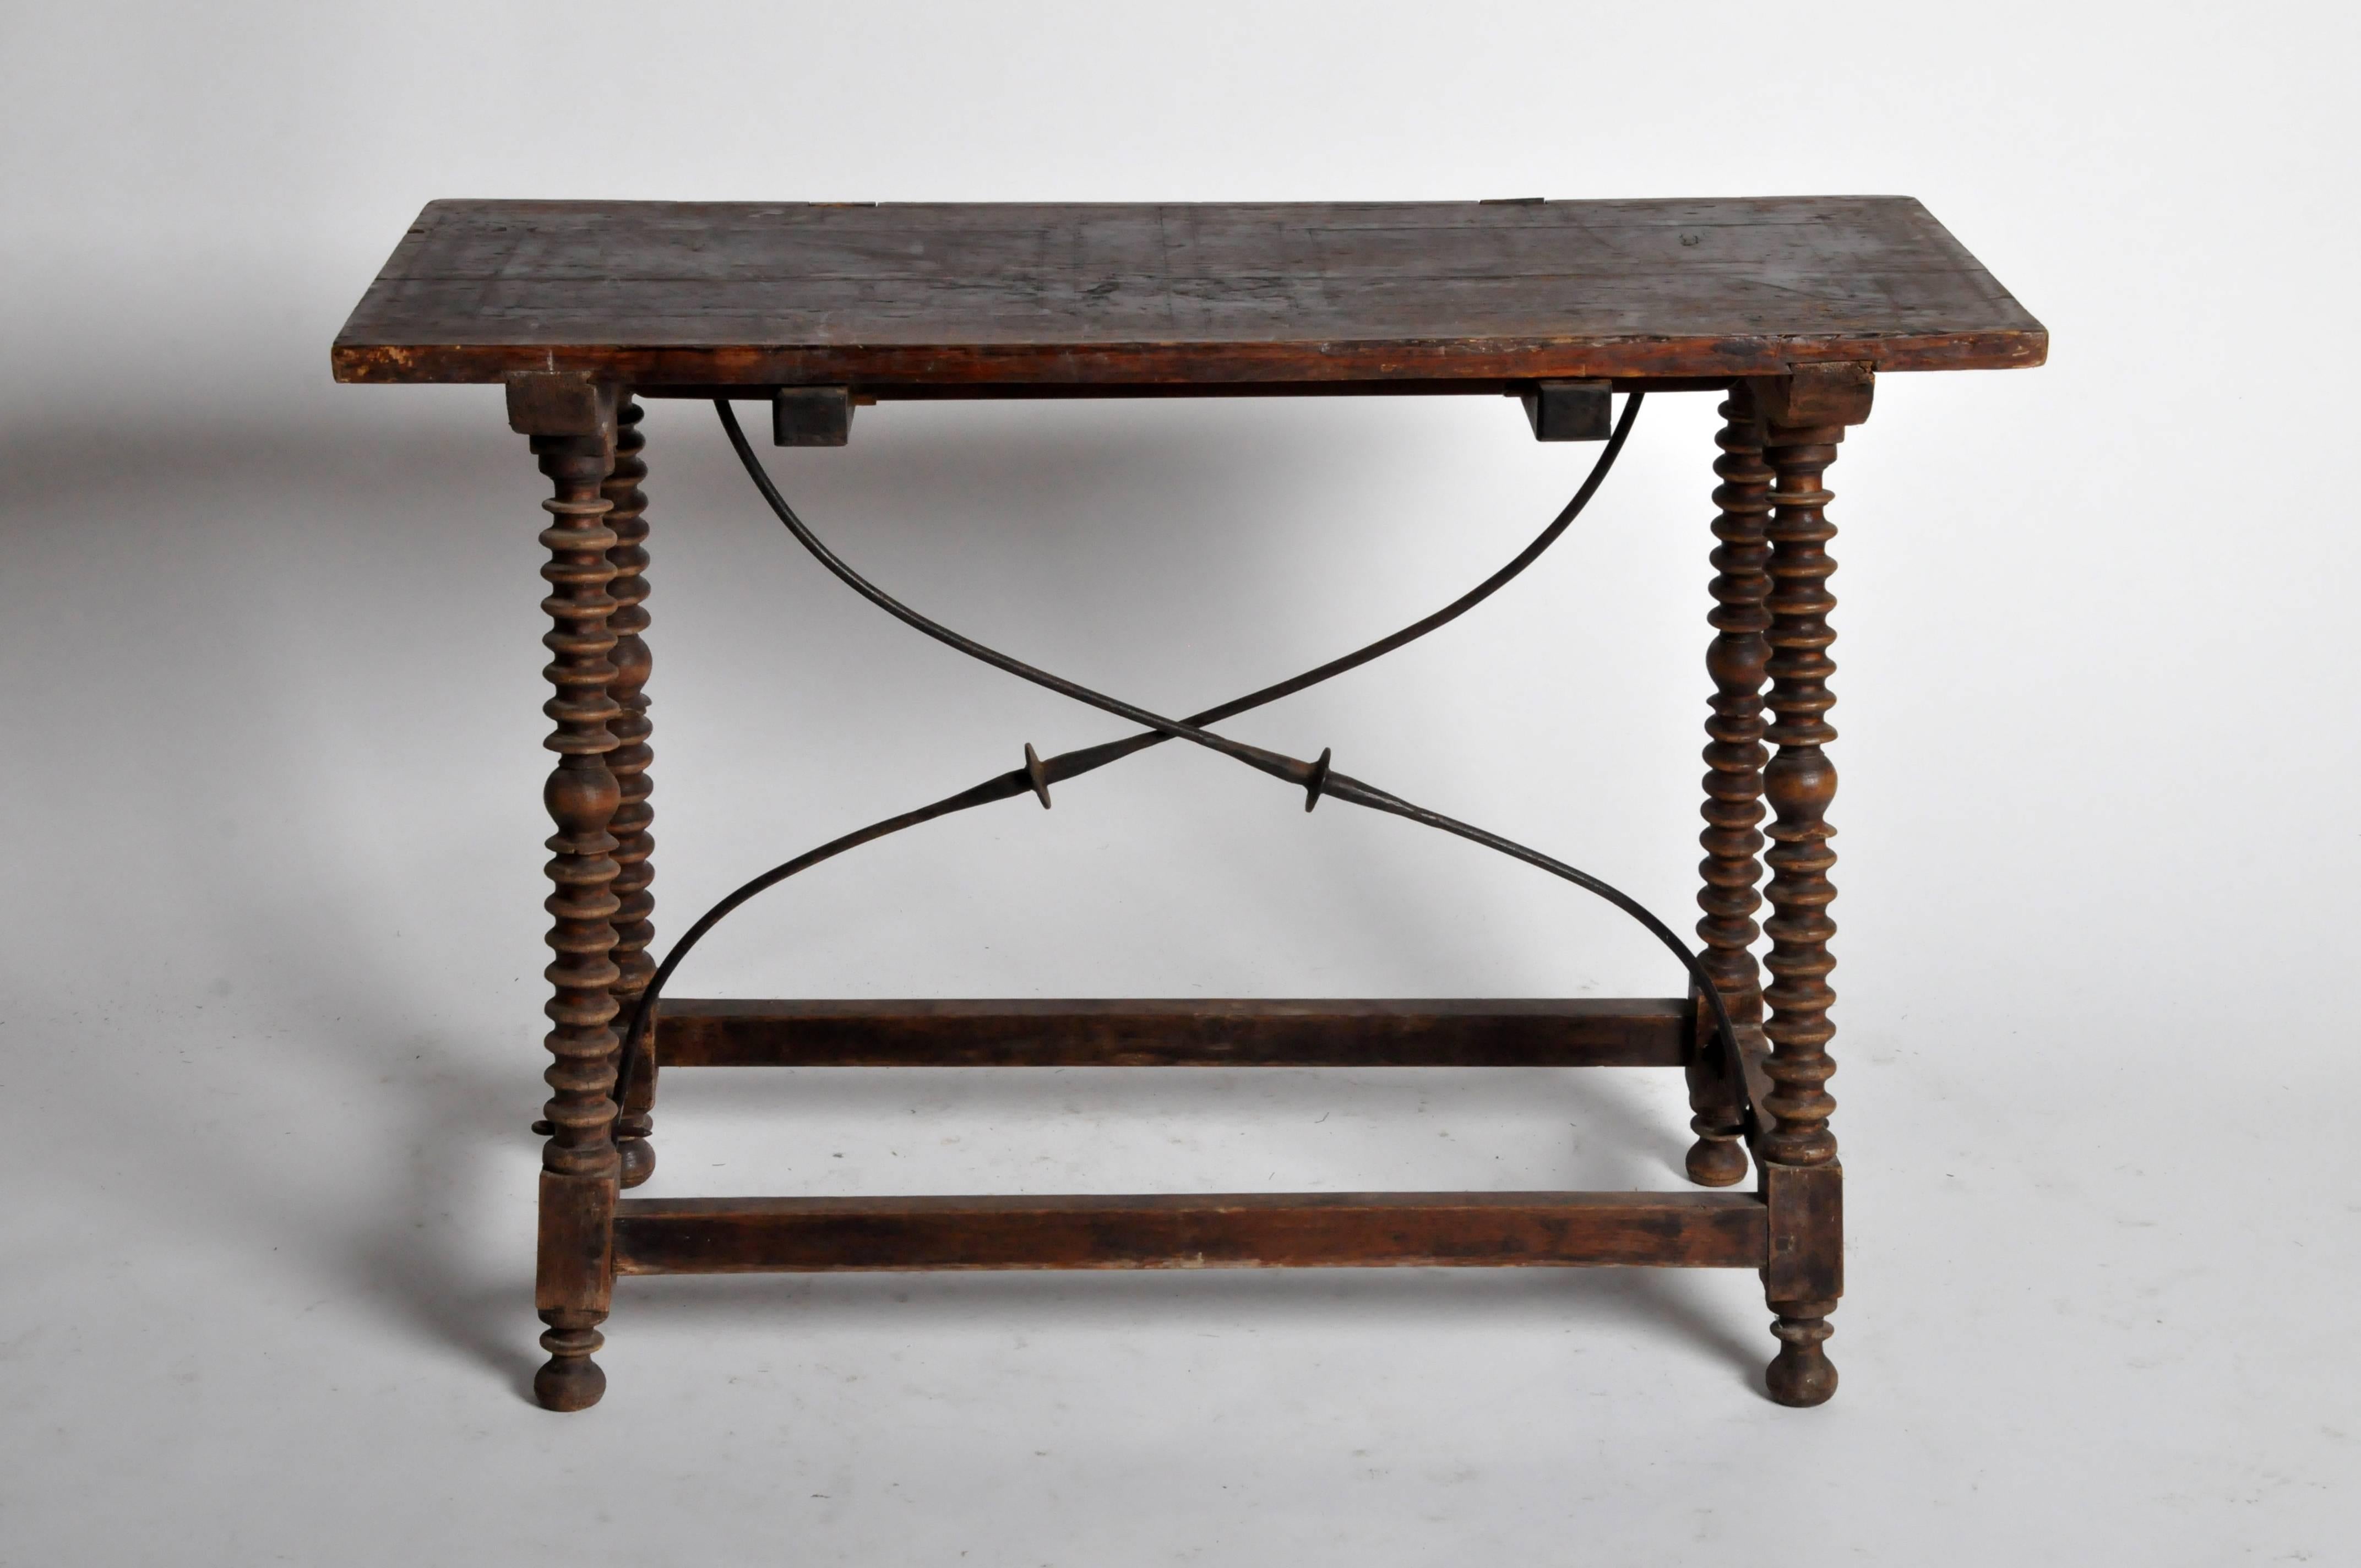 Based on of 17th century Spanish furniture, this Baroque style side table features bobbin turned legs and X-form curved iron stretchers.